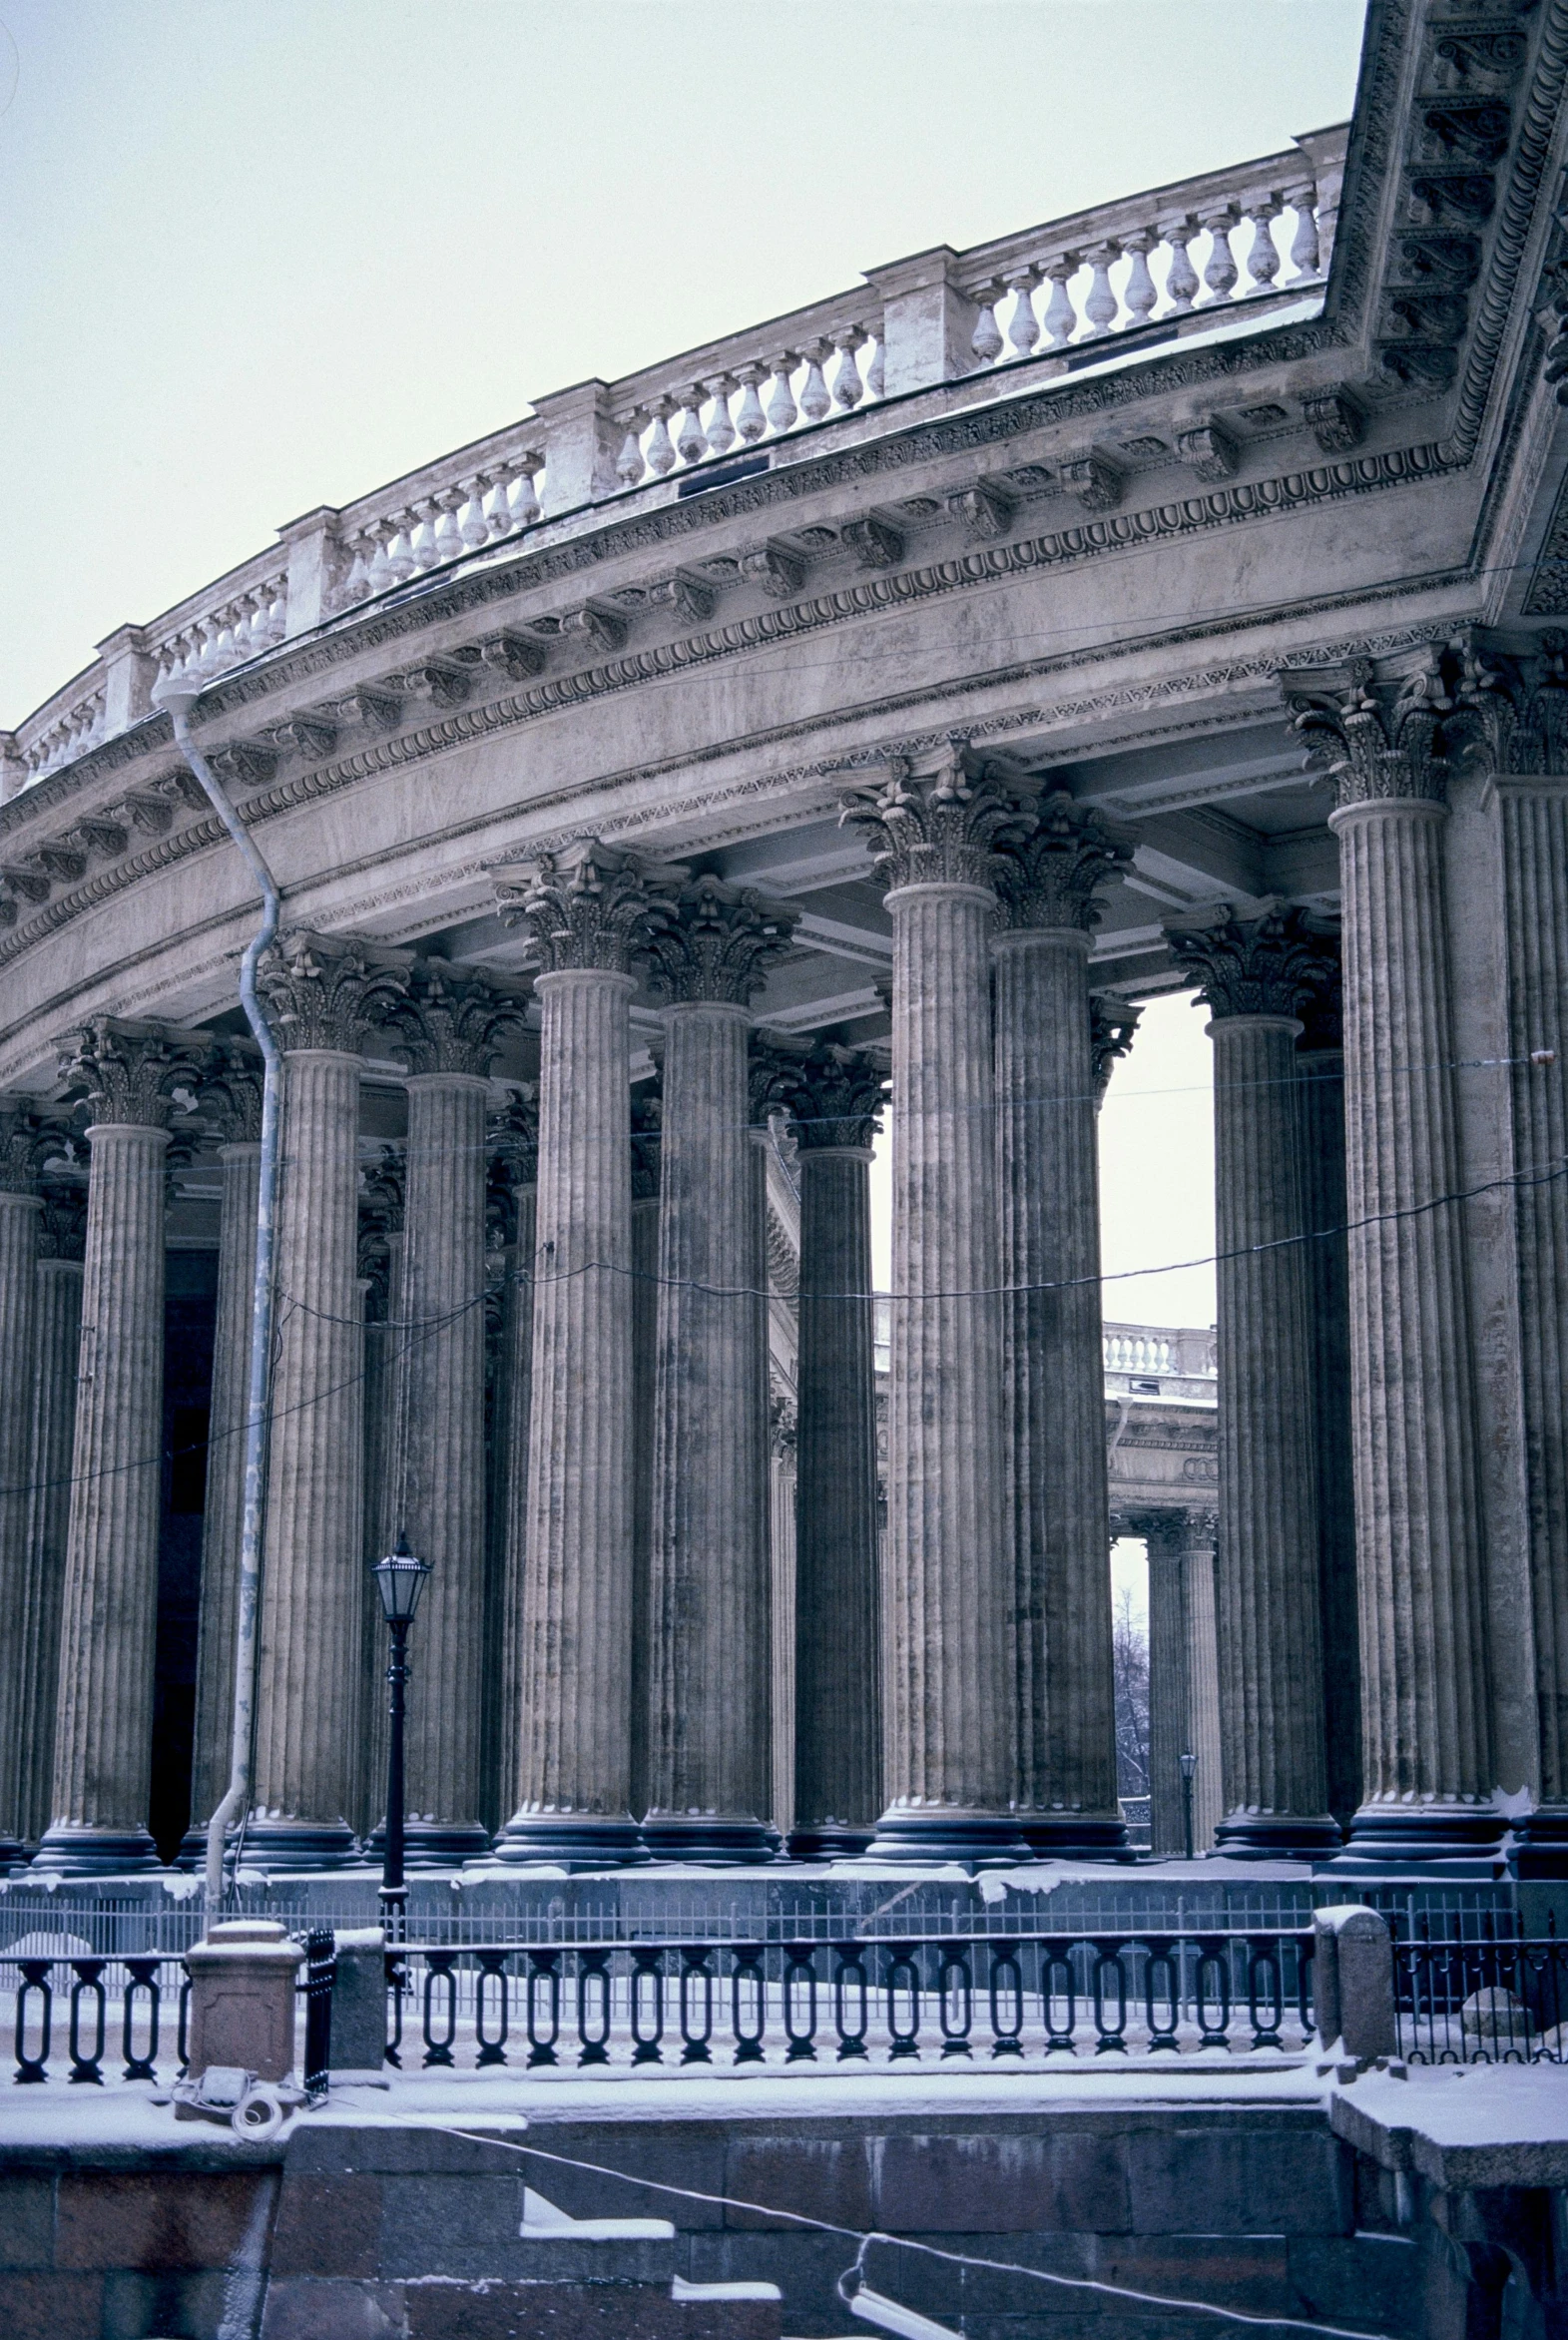 there is snow on the ground in front of a building, flickr, neoclassicism, giant towering pillars, photo taken on fujifilm superia, russian architecture, pantheon